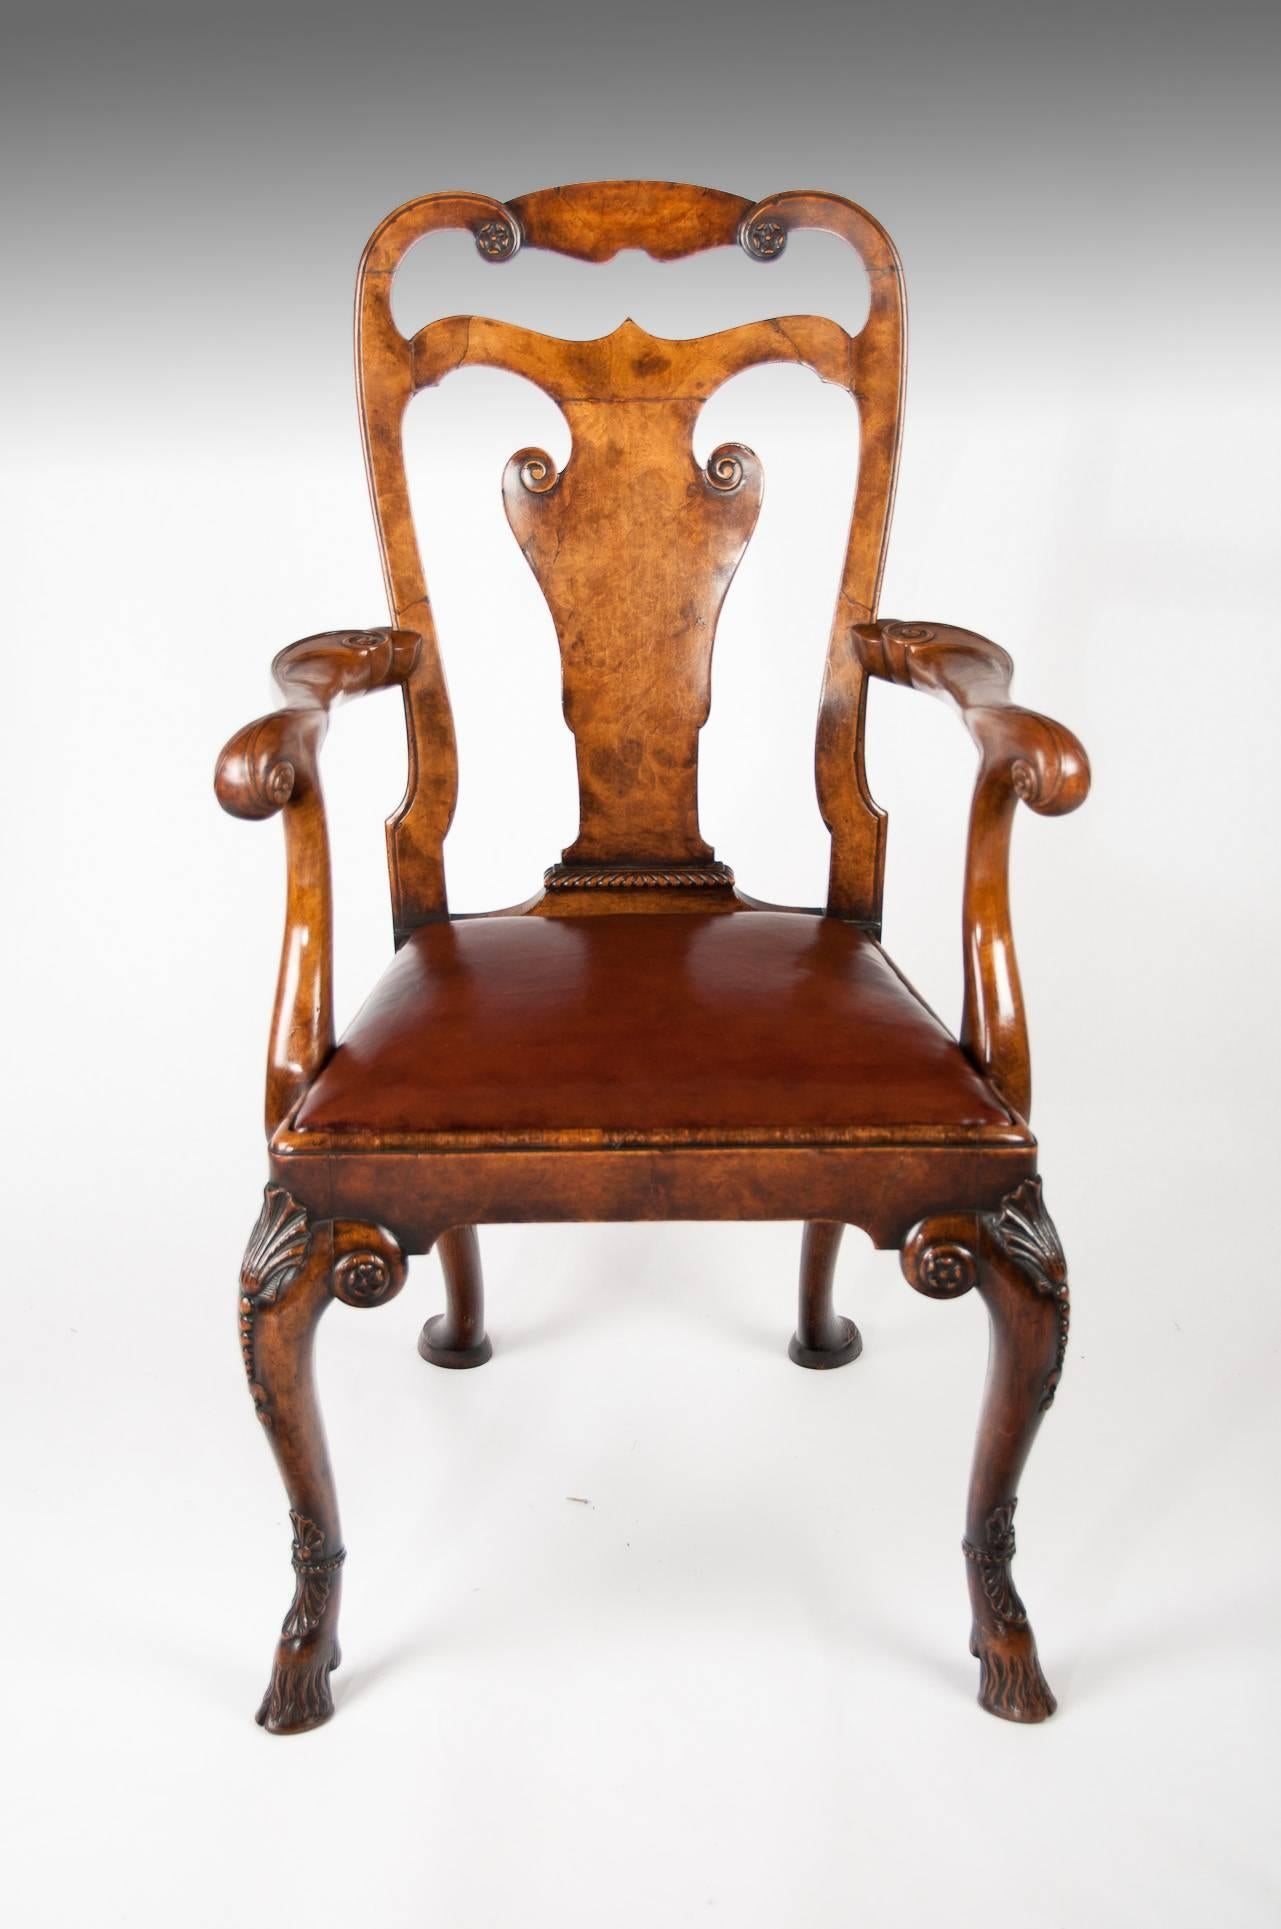 Leather Superb Antique Walnut Desk Chair by Charles Tozer